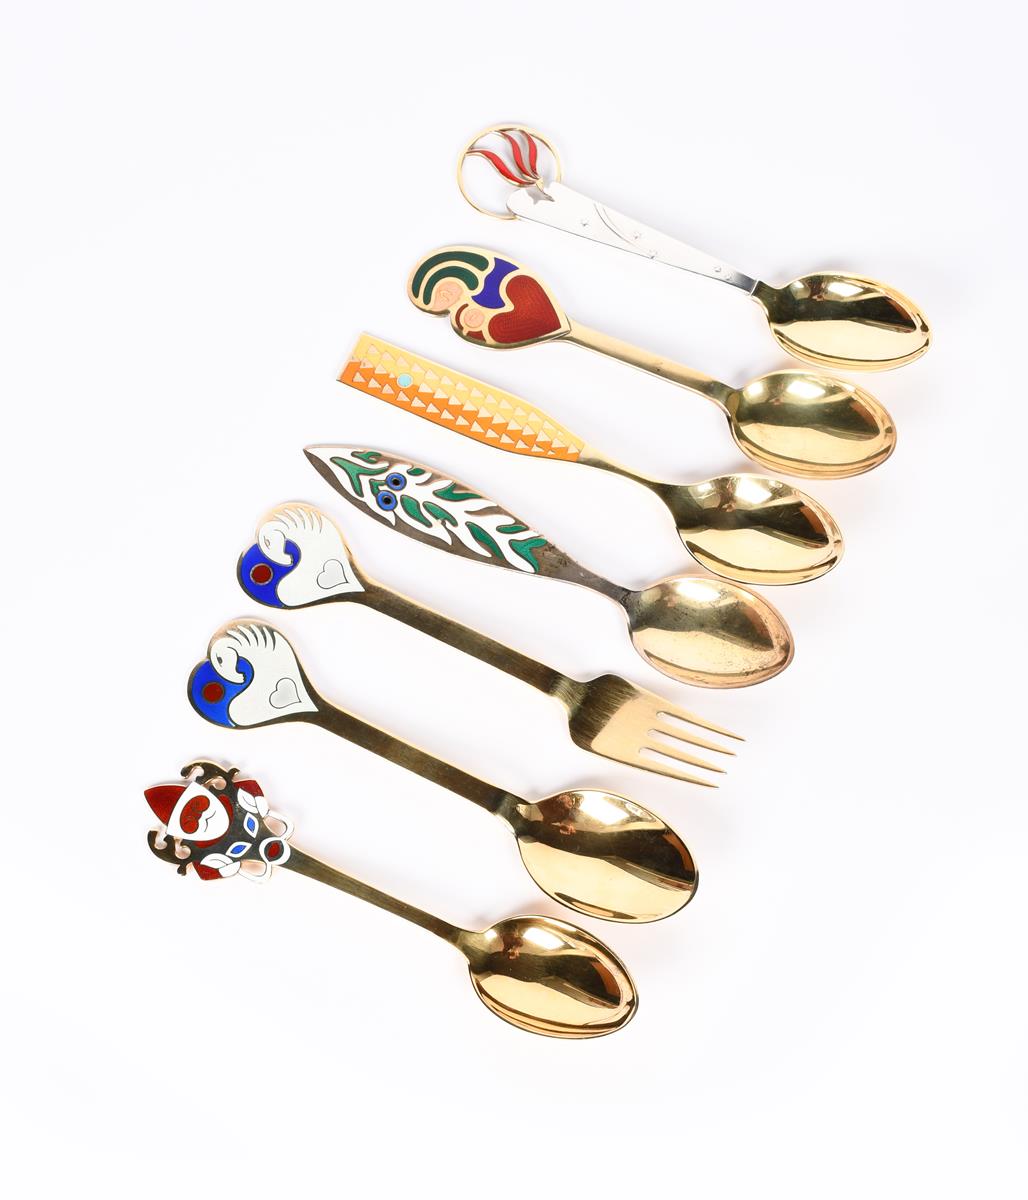 An A Michelsen silver gilt and enamel Christmas 1978 spoon and fork designed by Vibeke Alfert, an